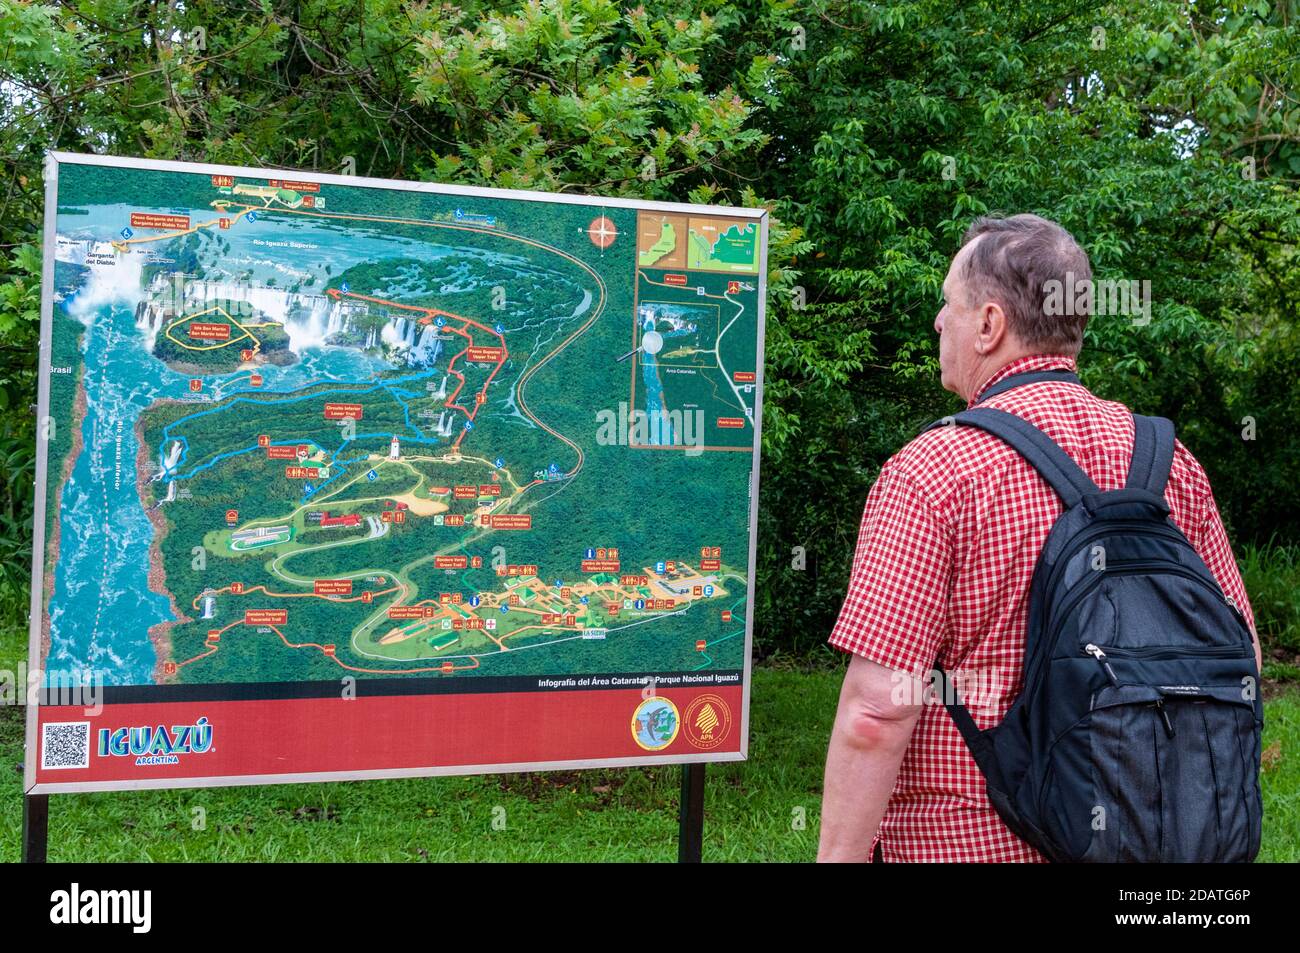 A visitor studies the large map of the waterfall locations and foot trails in the Iguazu National Park in Argentine.  The Iguazu Waterfalls is the Stock Photo